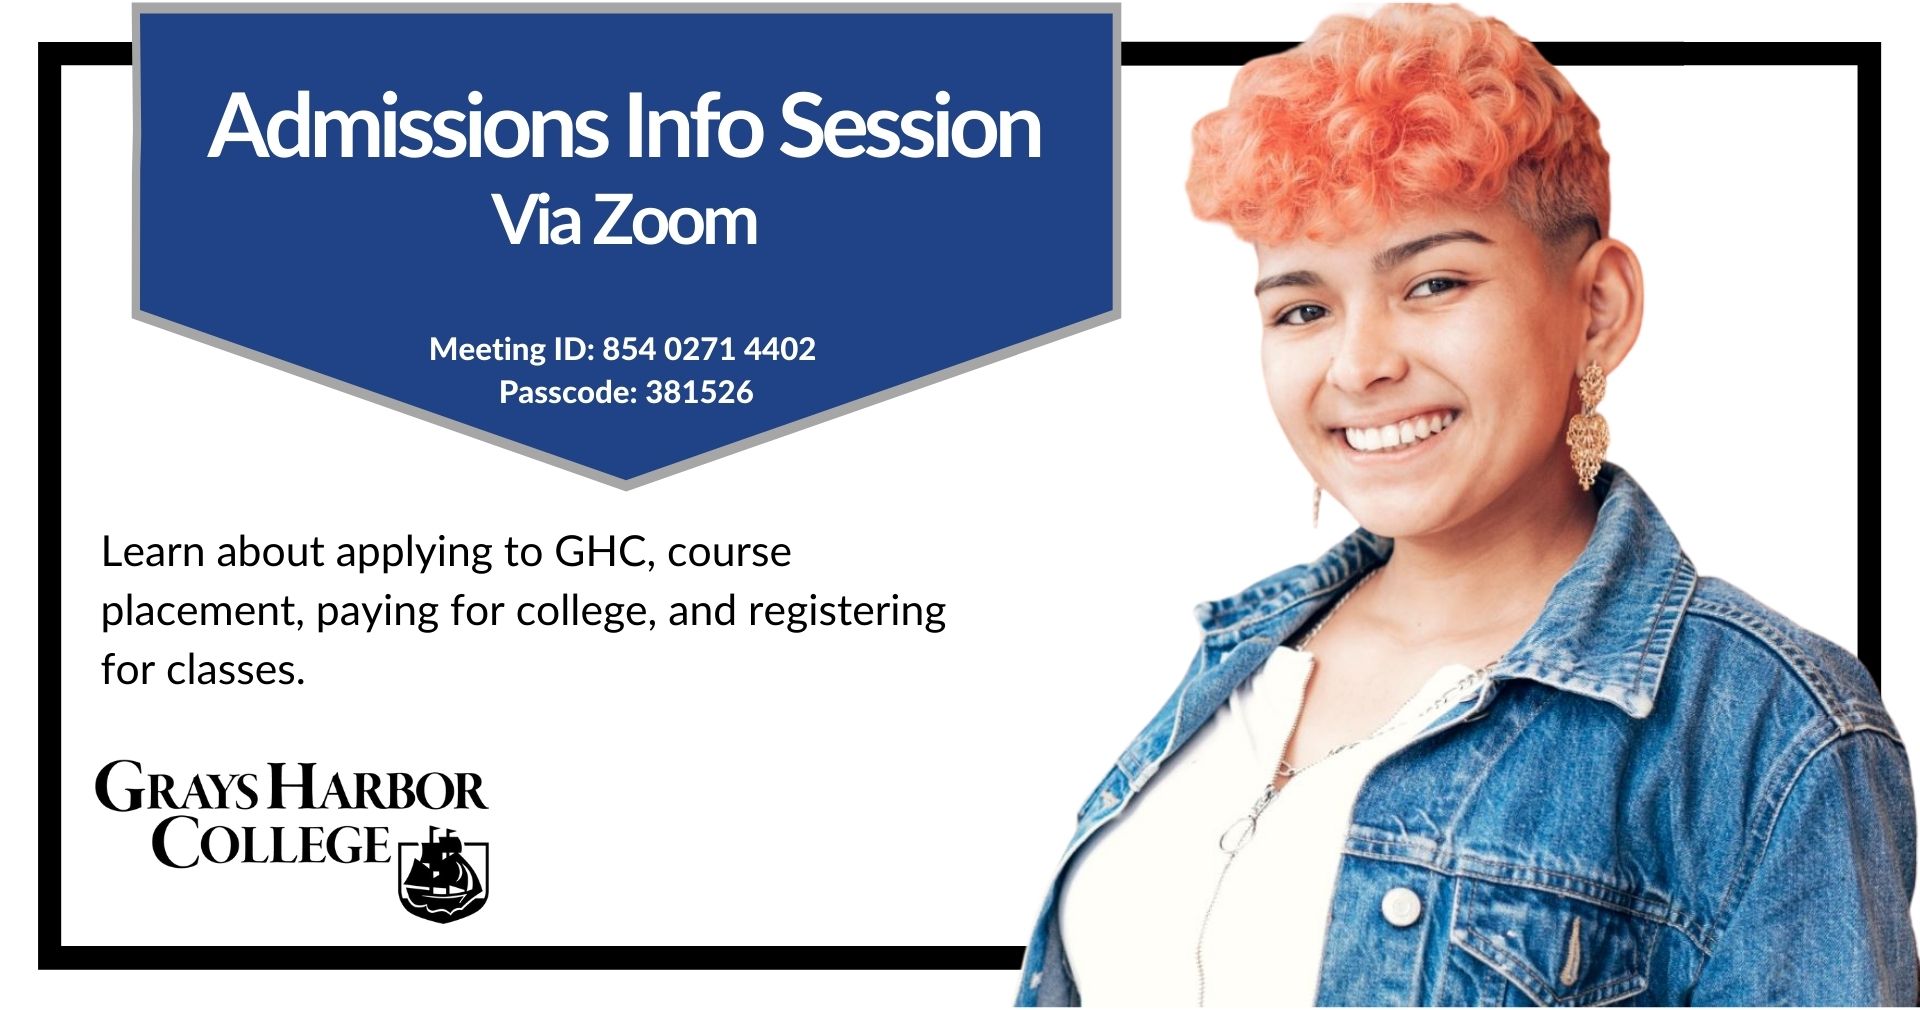 Admissions info session with details listed above